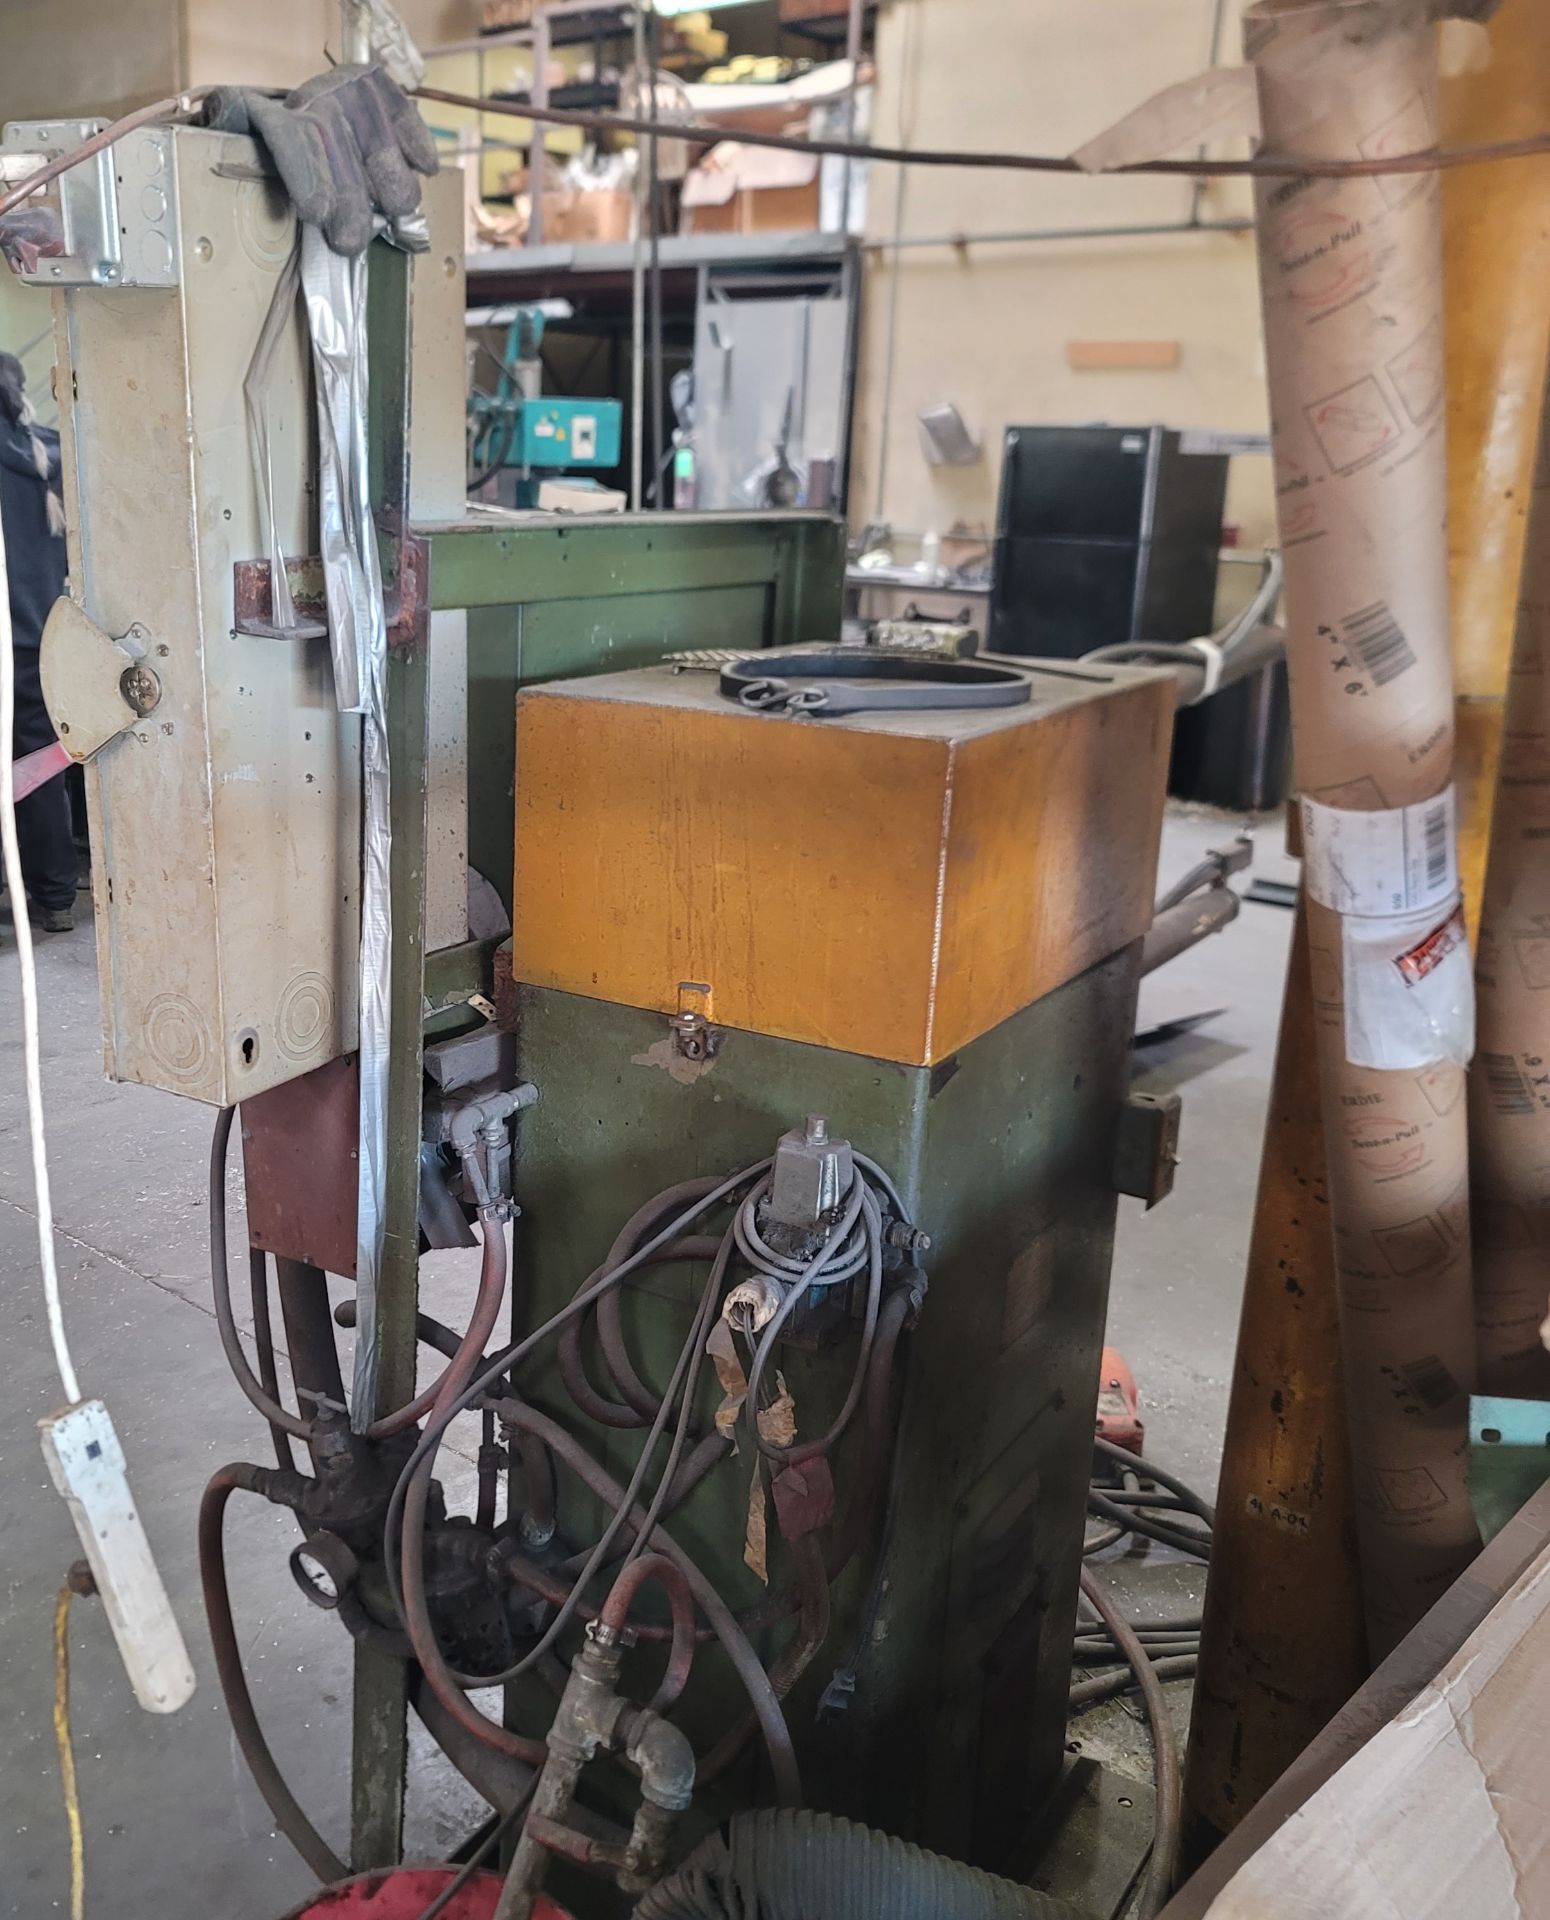 ACME SPOT WELDER, TYPE 3-42-100, STYLE: AR, 100 KVA, 230 VOLTS, 42" THROAT, S/N 11470 - Image 5 of 6